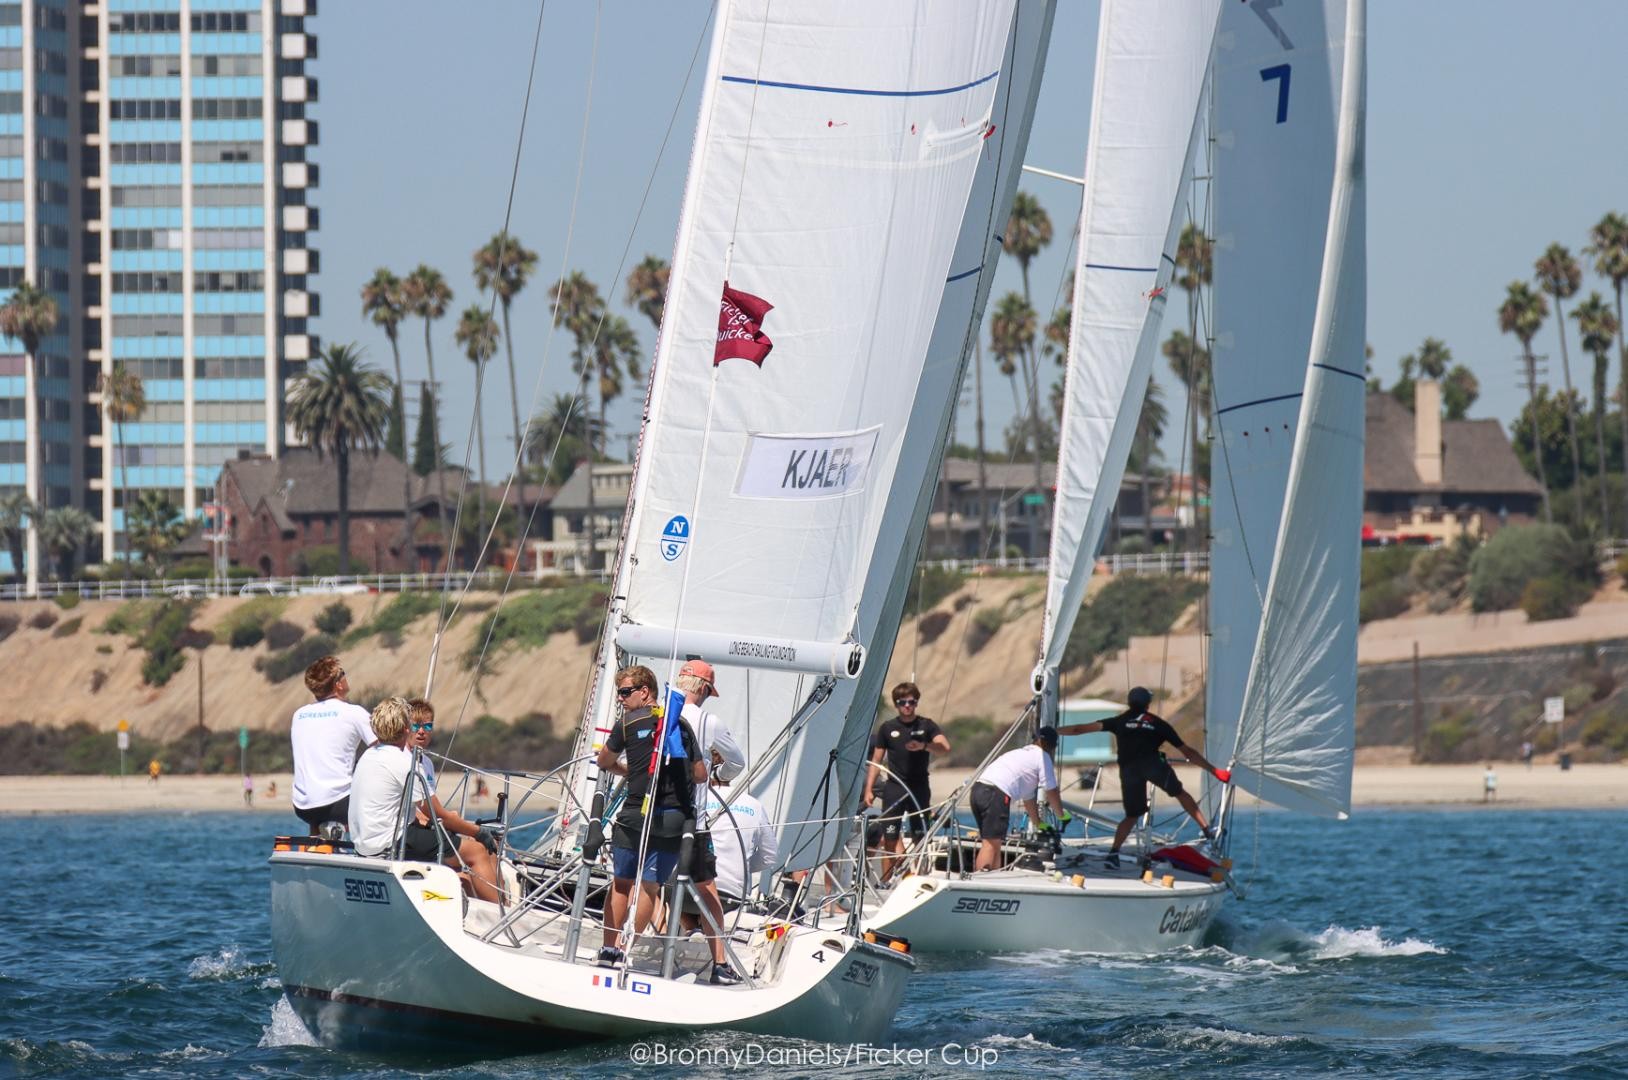 Wind & leaderboard shift on day two of Ficker Cup: Wood, Petersen, Kjaer and Potts advance